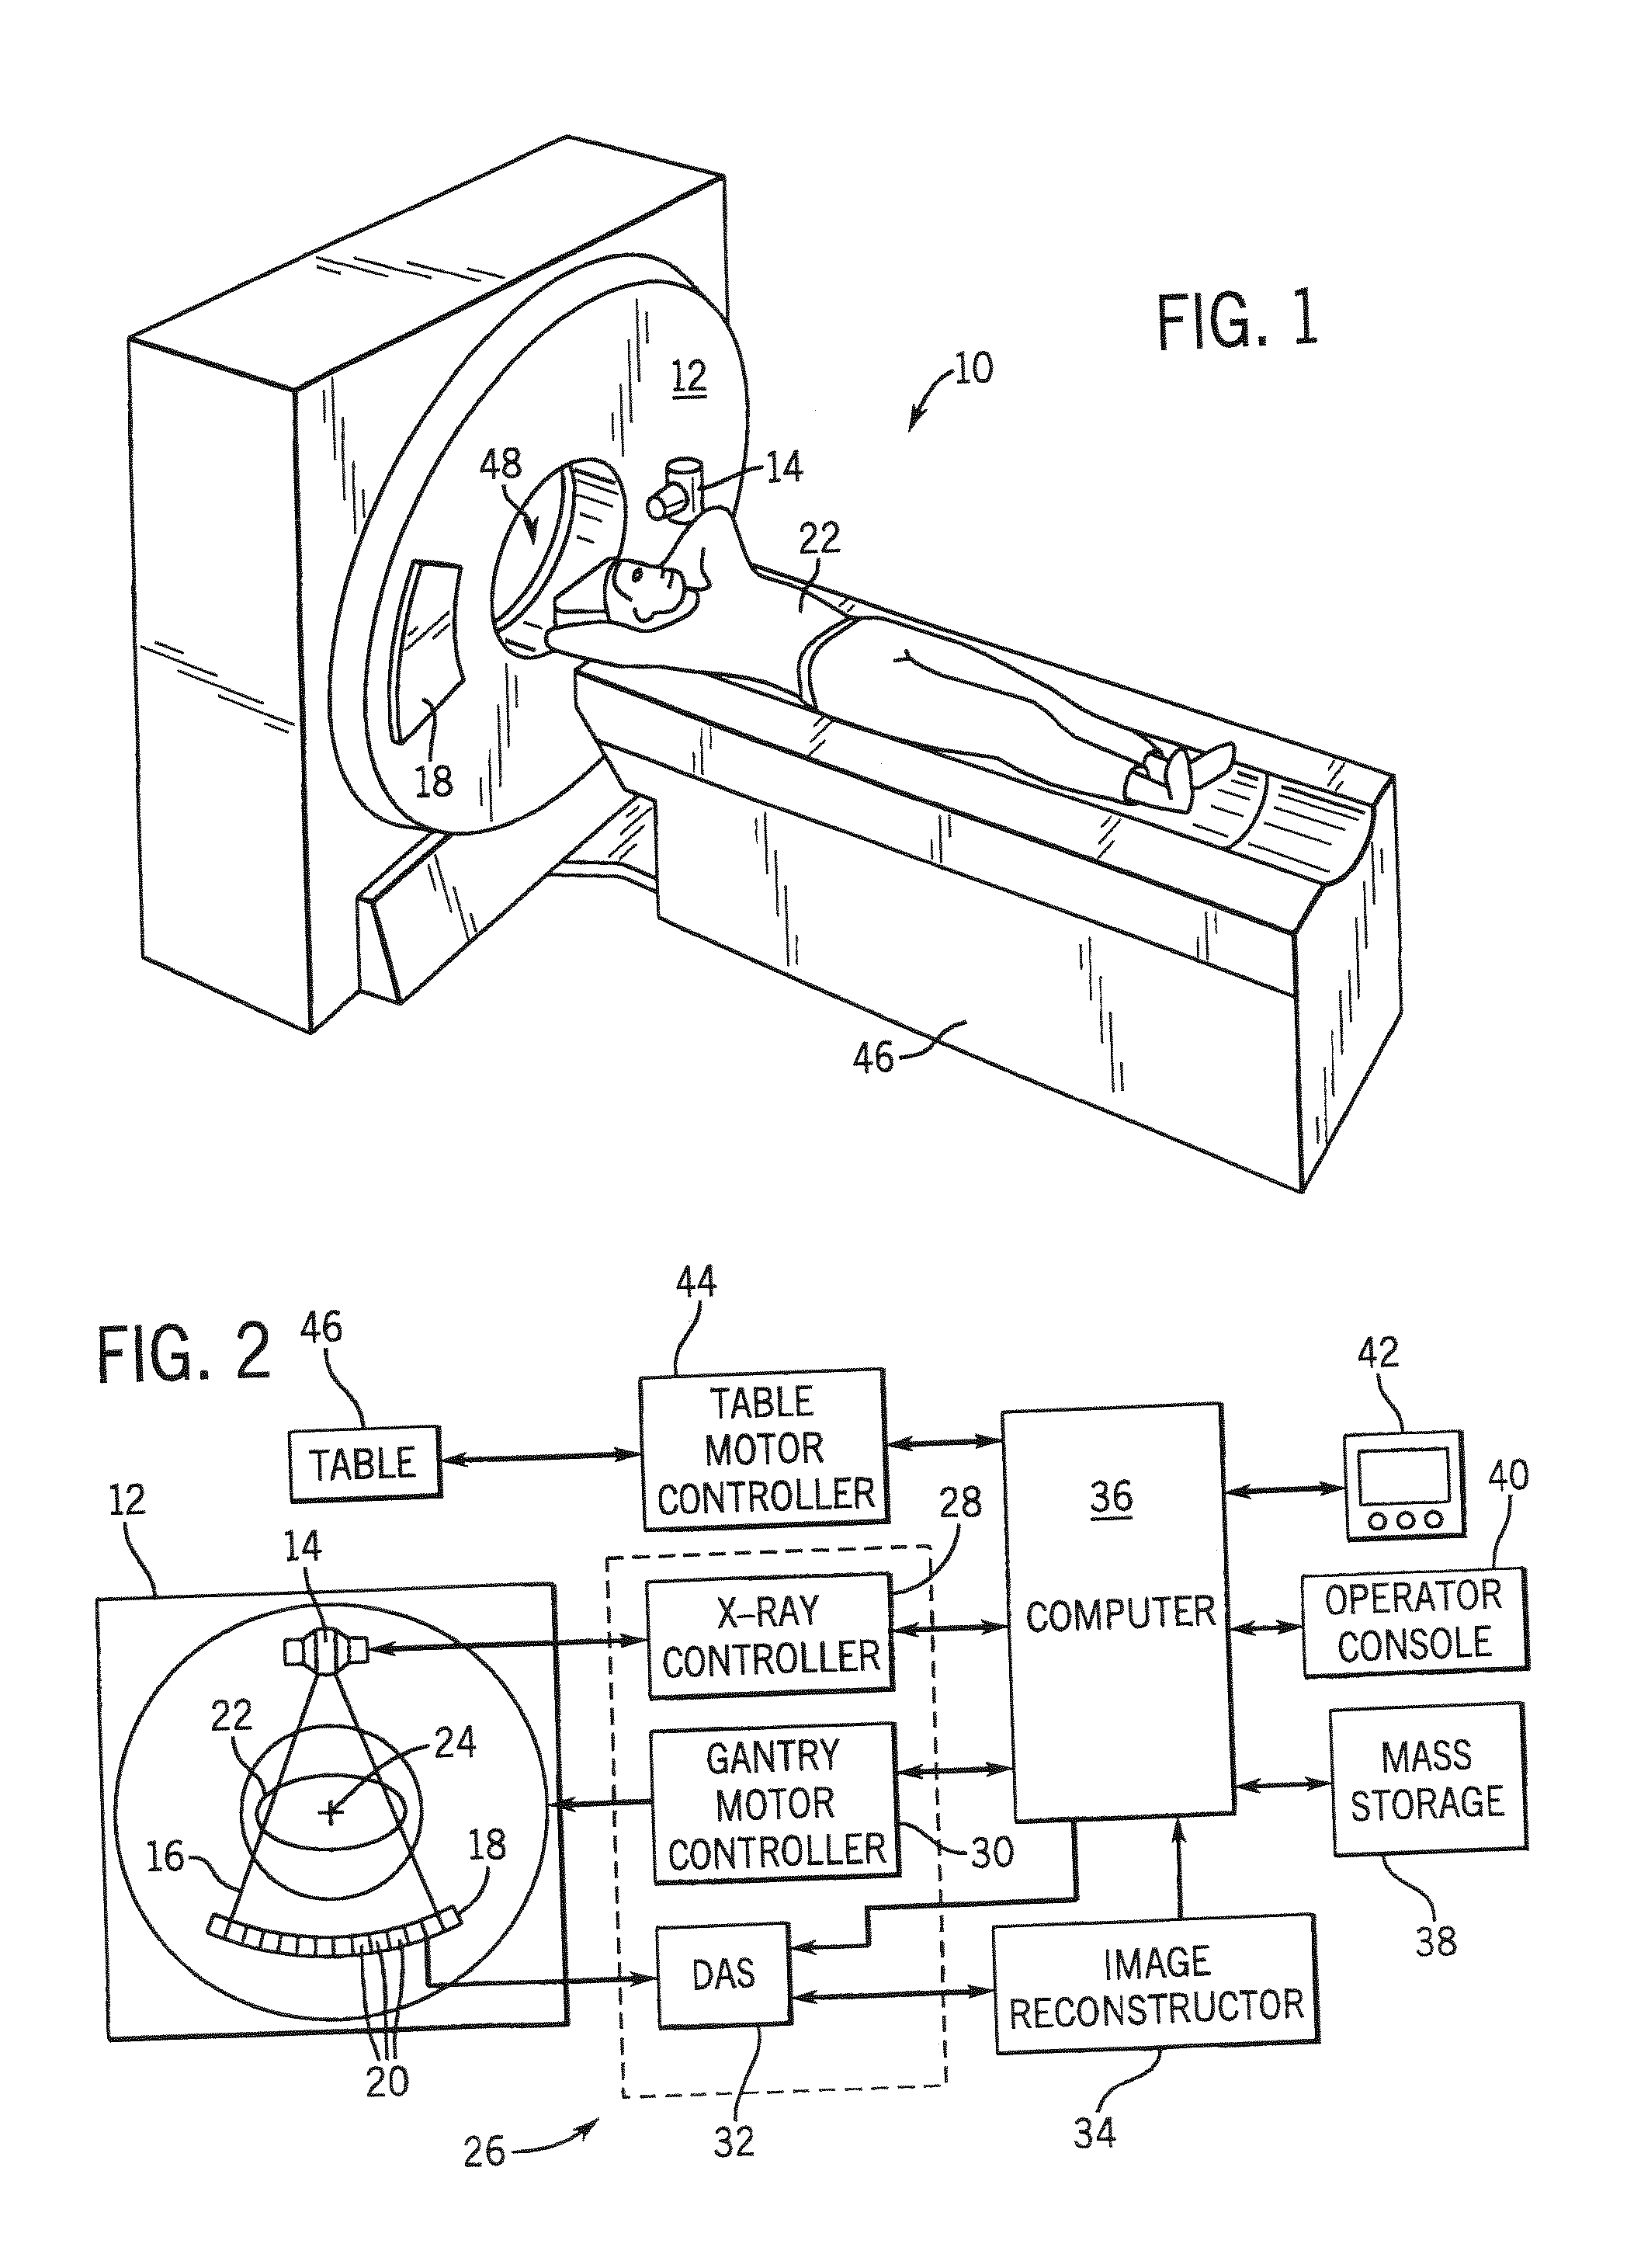 Method of manufacturing, and a collimator mandrel having variable attenuation characteristics for a CT system